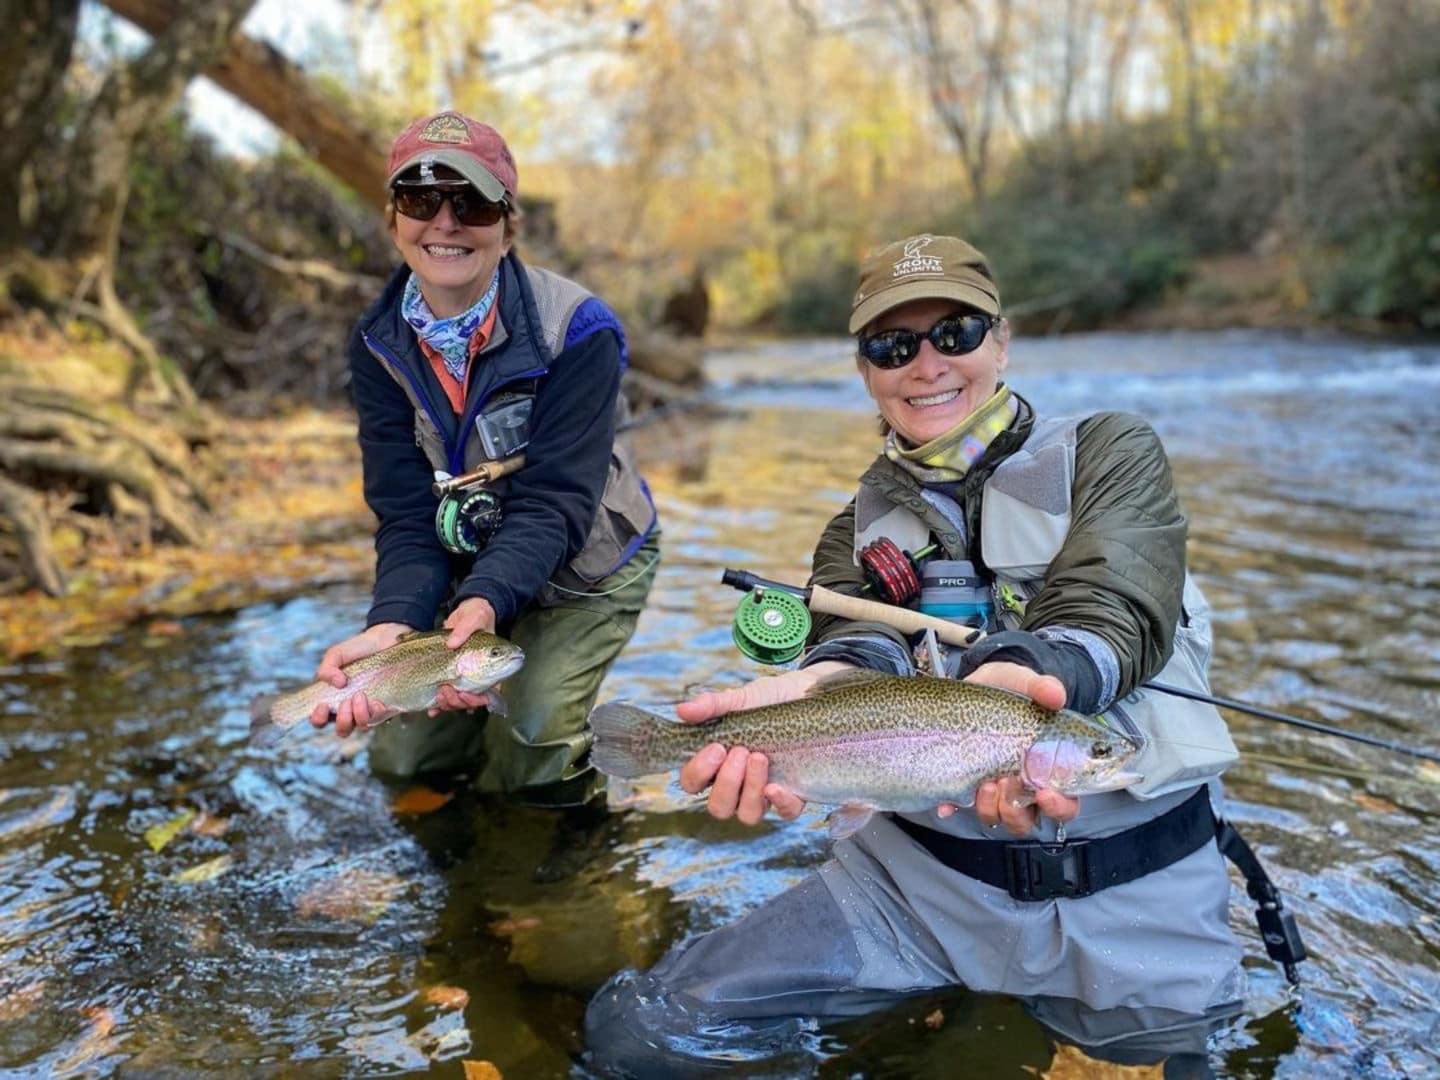 Headwaters Outfitters Women's Fly Fishing 101 Workshop